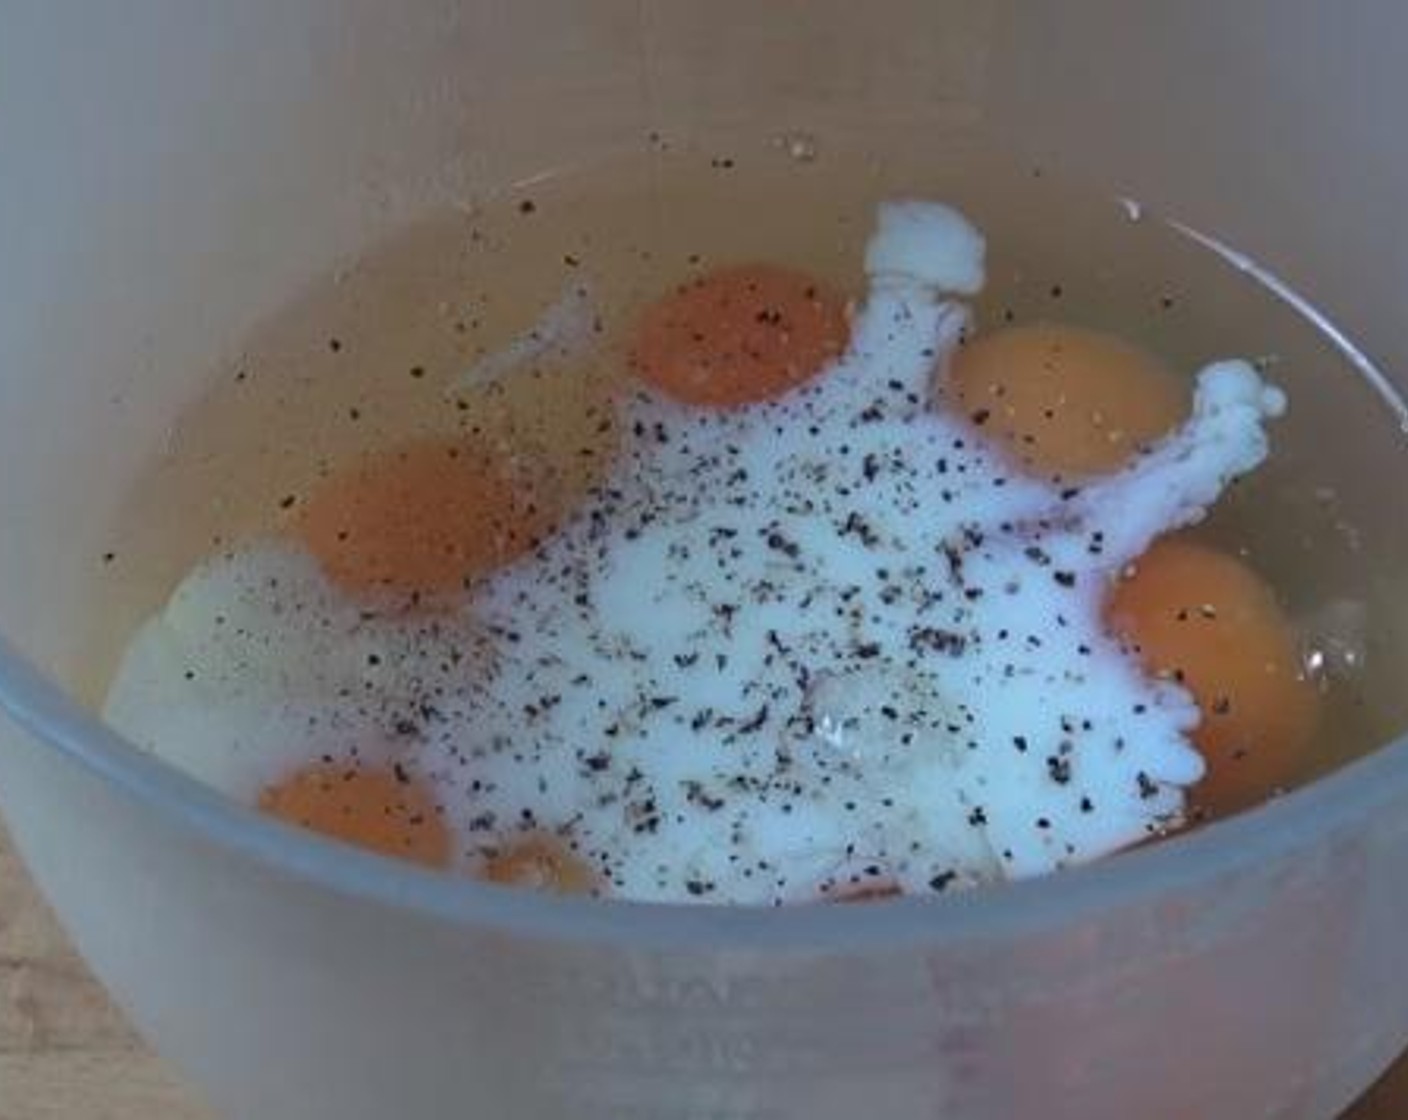 step 3 Into a bowl, add and mix the Eggs (8), Milk (1/3 cup), Salt (to taste) and Ground Black Pepper (to taste).